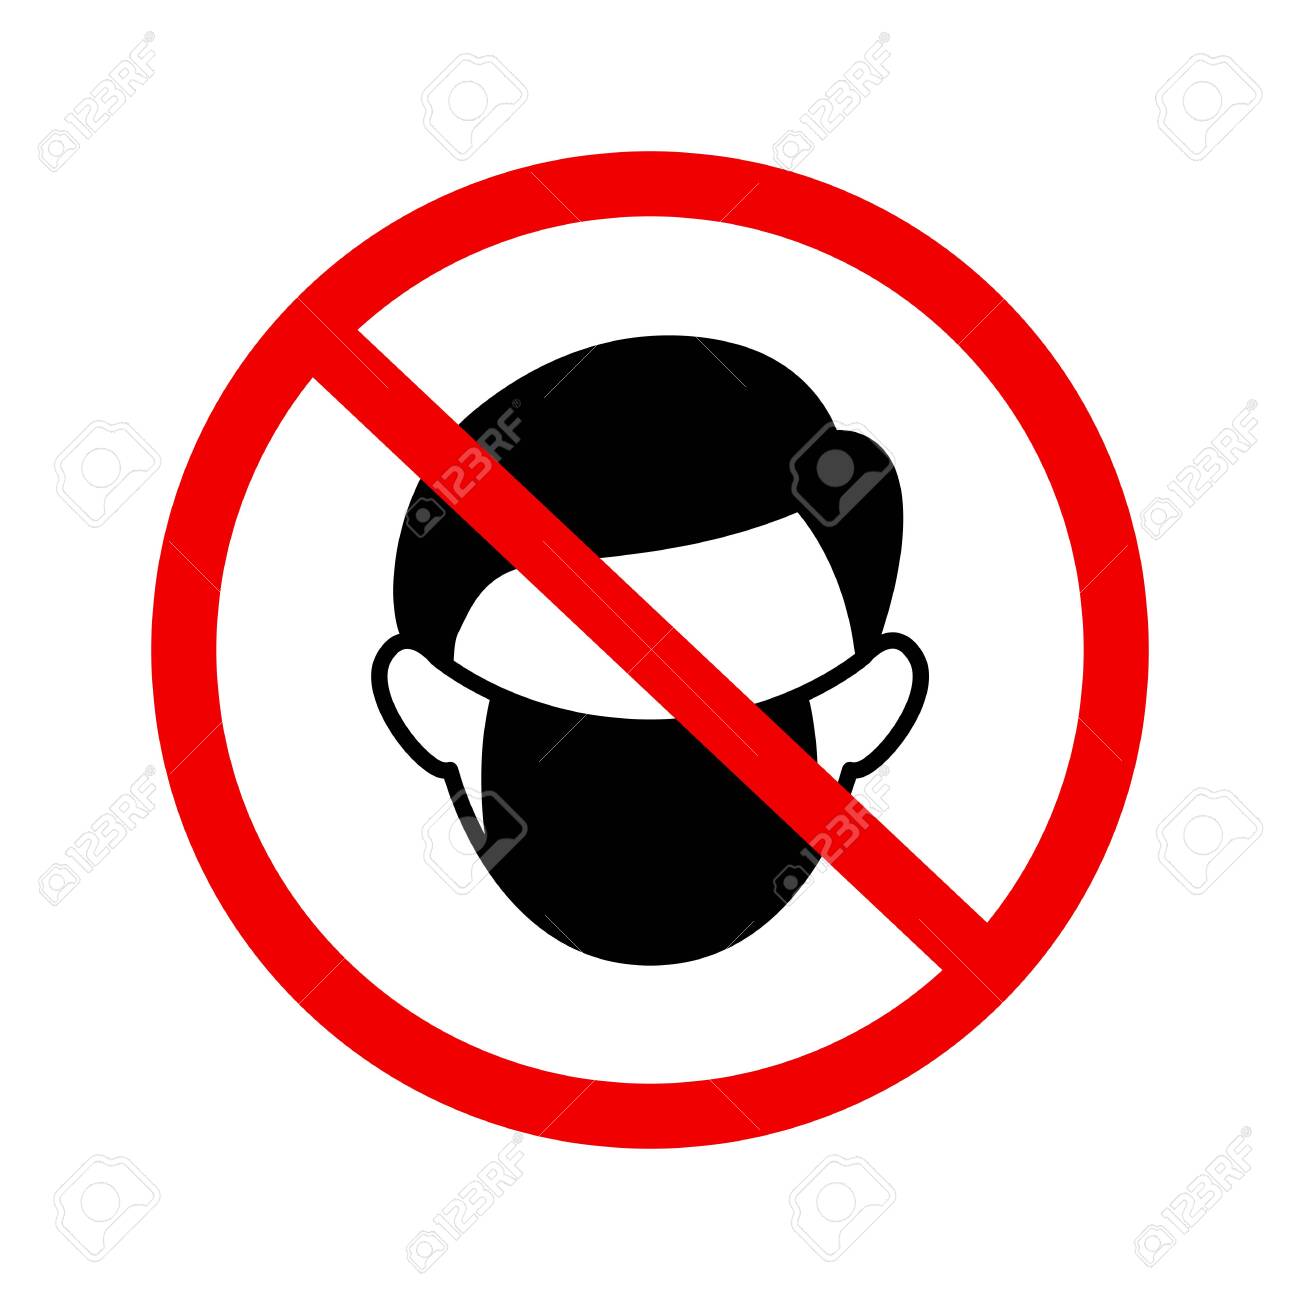 139457478-no-wear-mask-sign-vector-icon-in-flat-style-on-white-background.jpg